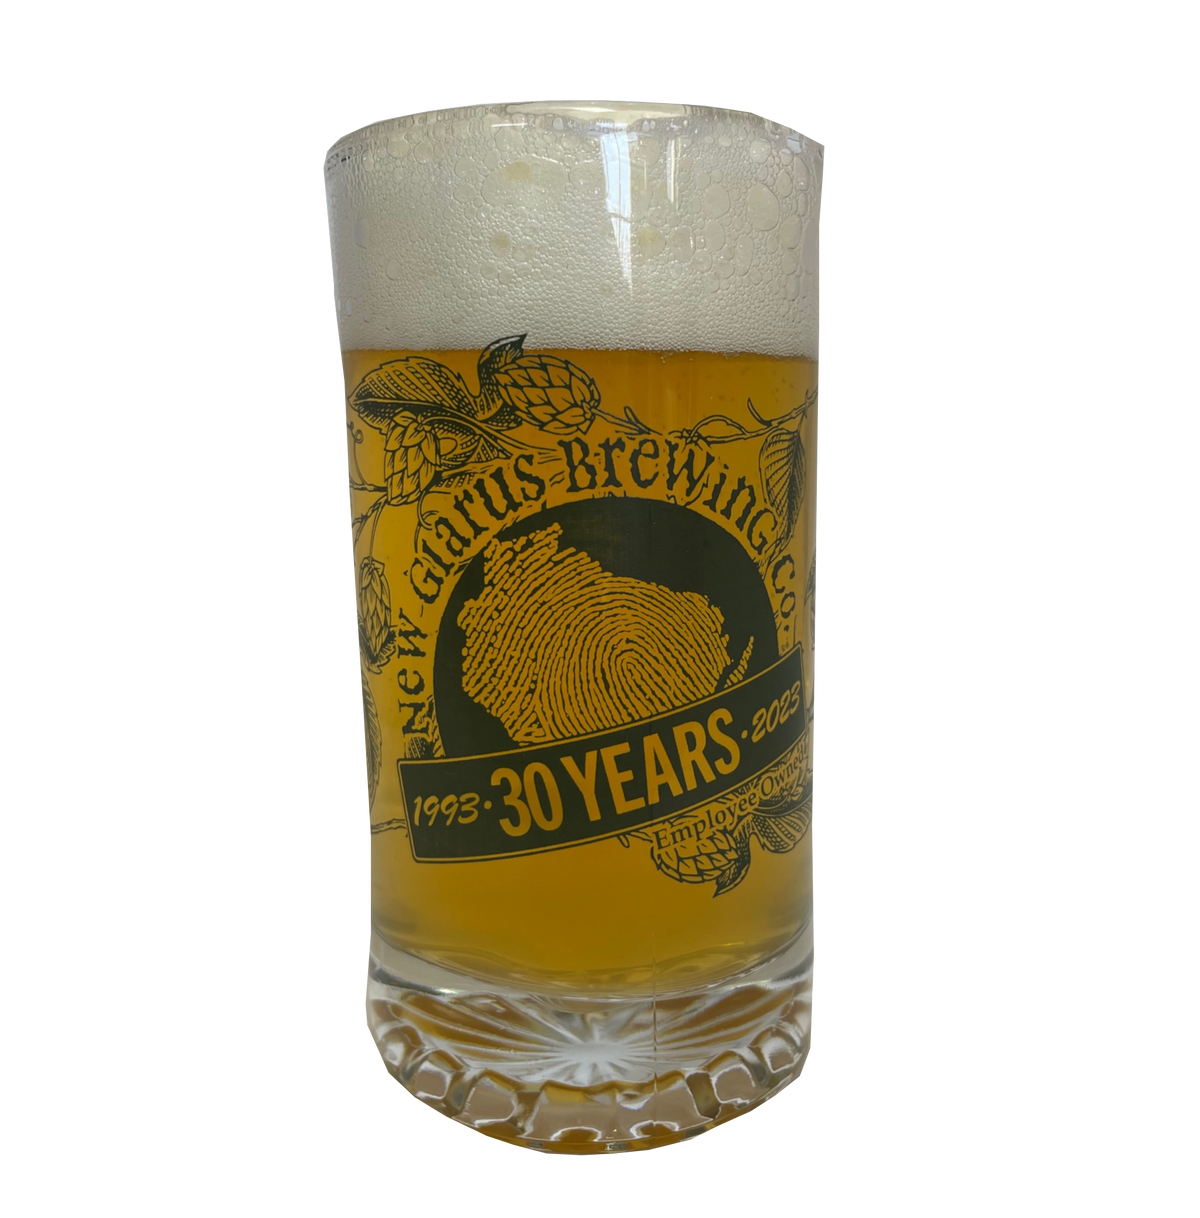 Clear glass handled stein the New Glarus Brewing Co. 1993 - 30 Years - 2023 with hop design in dark green ink